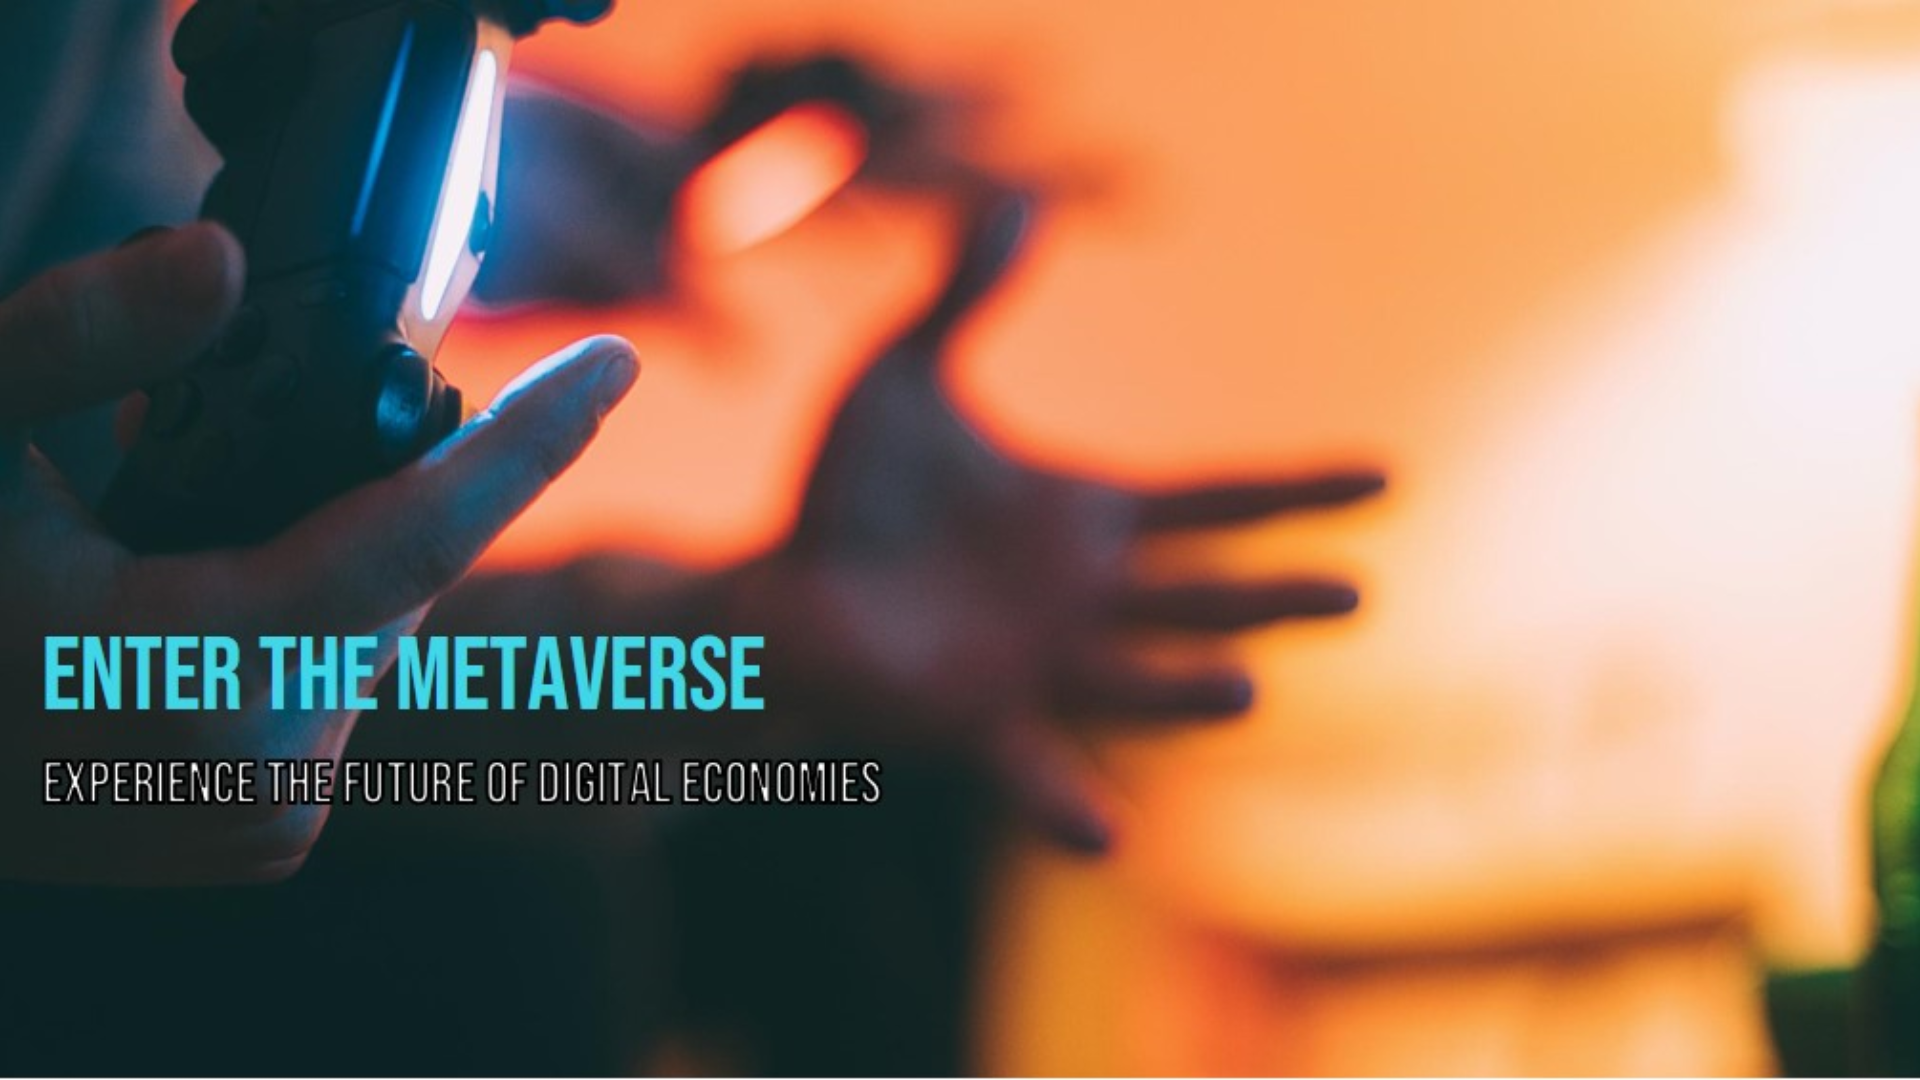 Discover how metaverse development is revolutionizing digital experiences, virtual economies, and social networking, shaping the future of interactions.